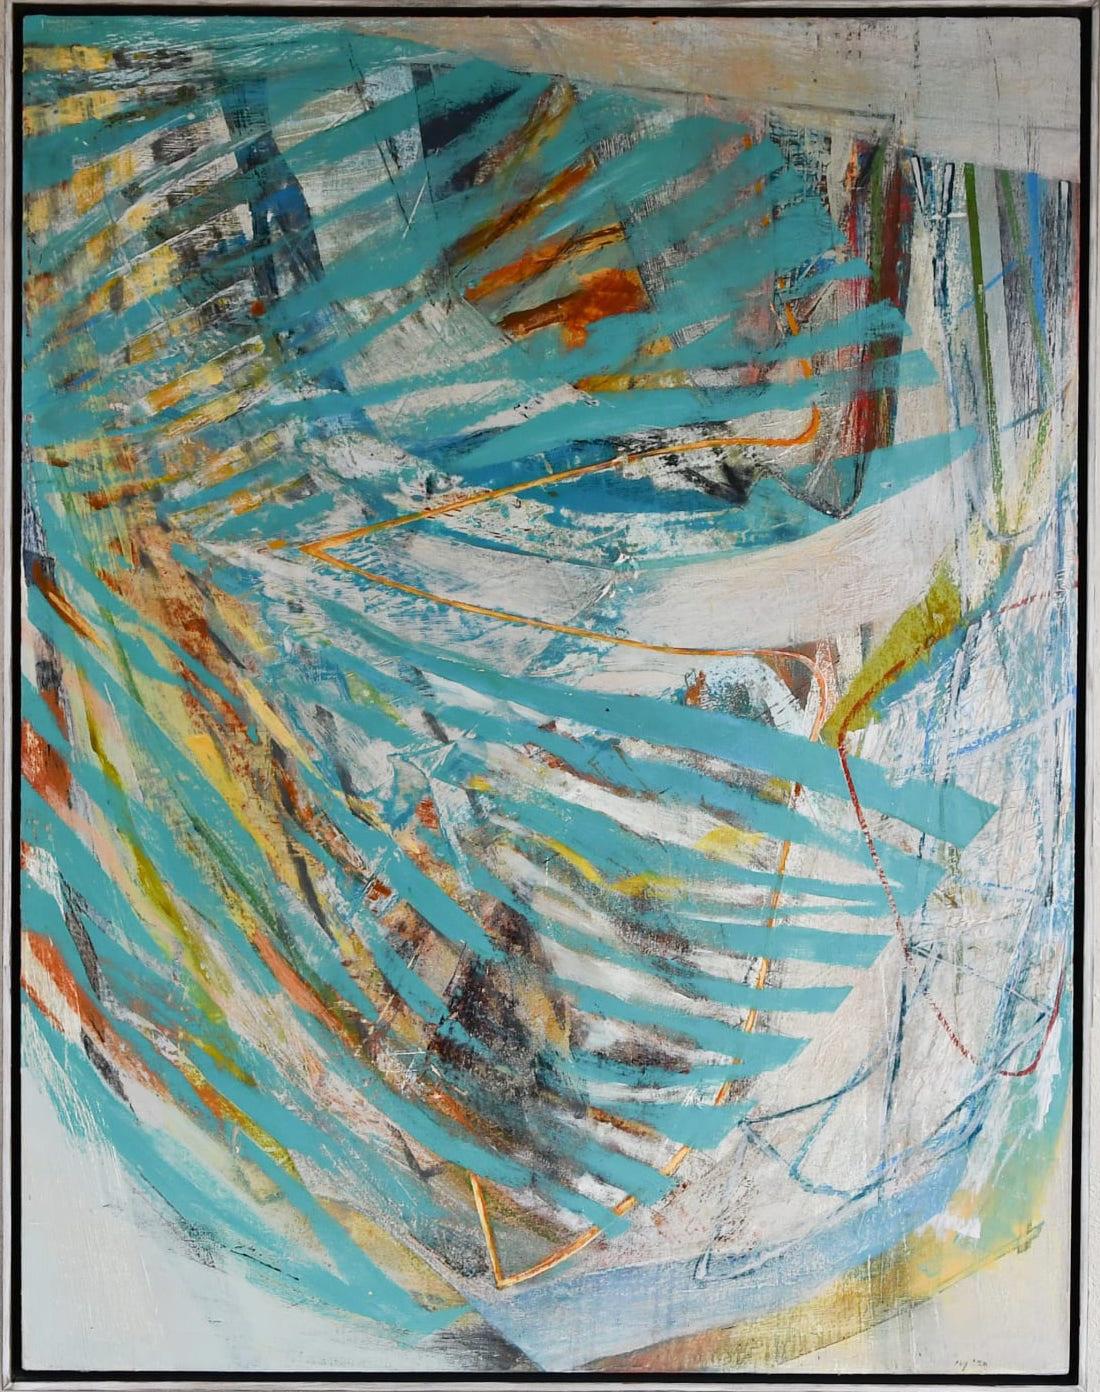 Swash - large upright/portrait abstract painting with blue, acrylic on board - Painting by Peter Joyce